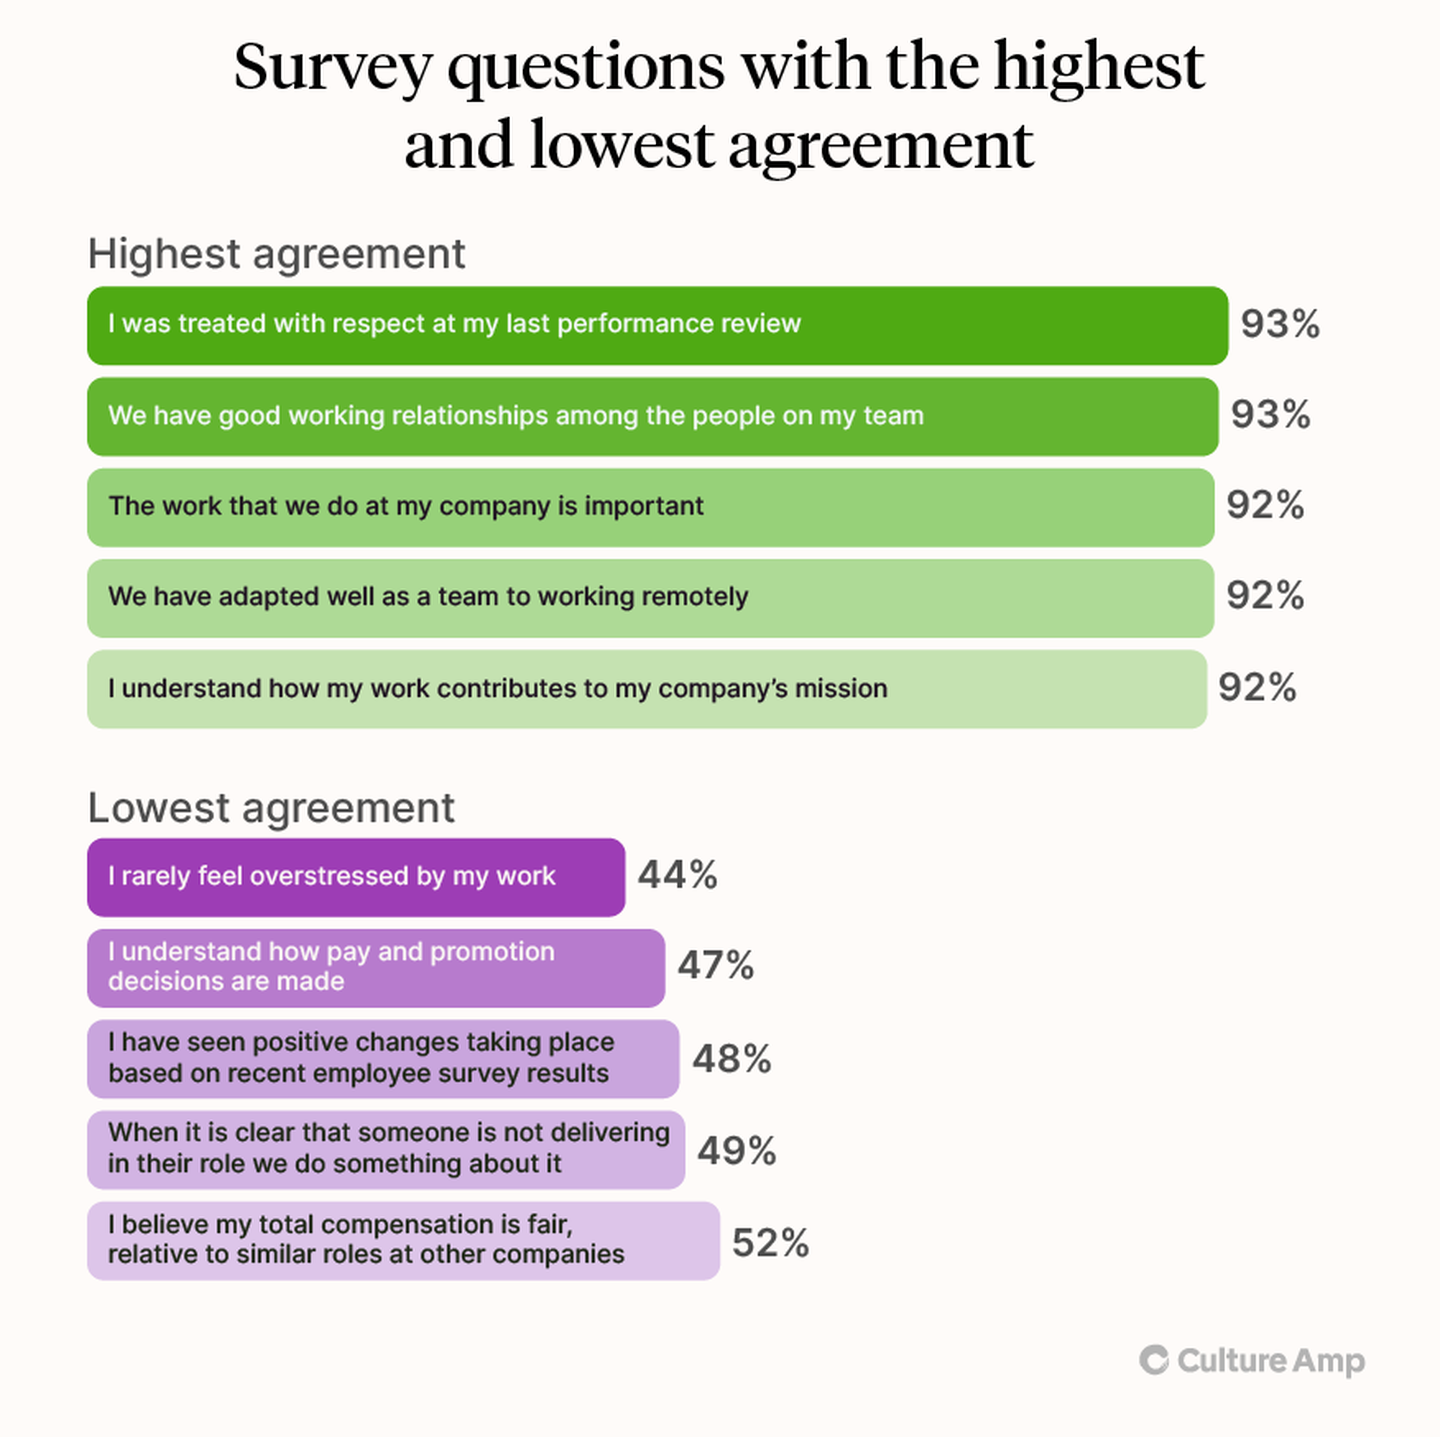 Chart depicting survey questions with the highest and lowest agreement